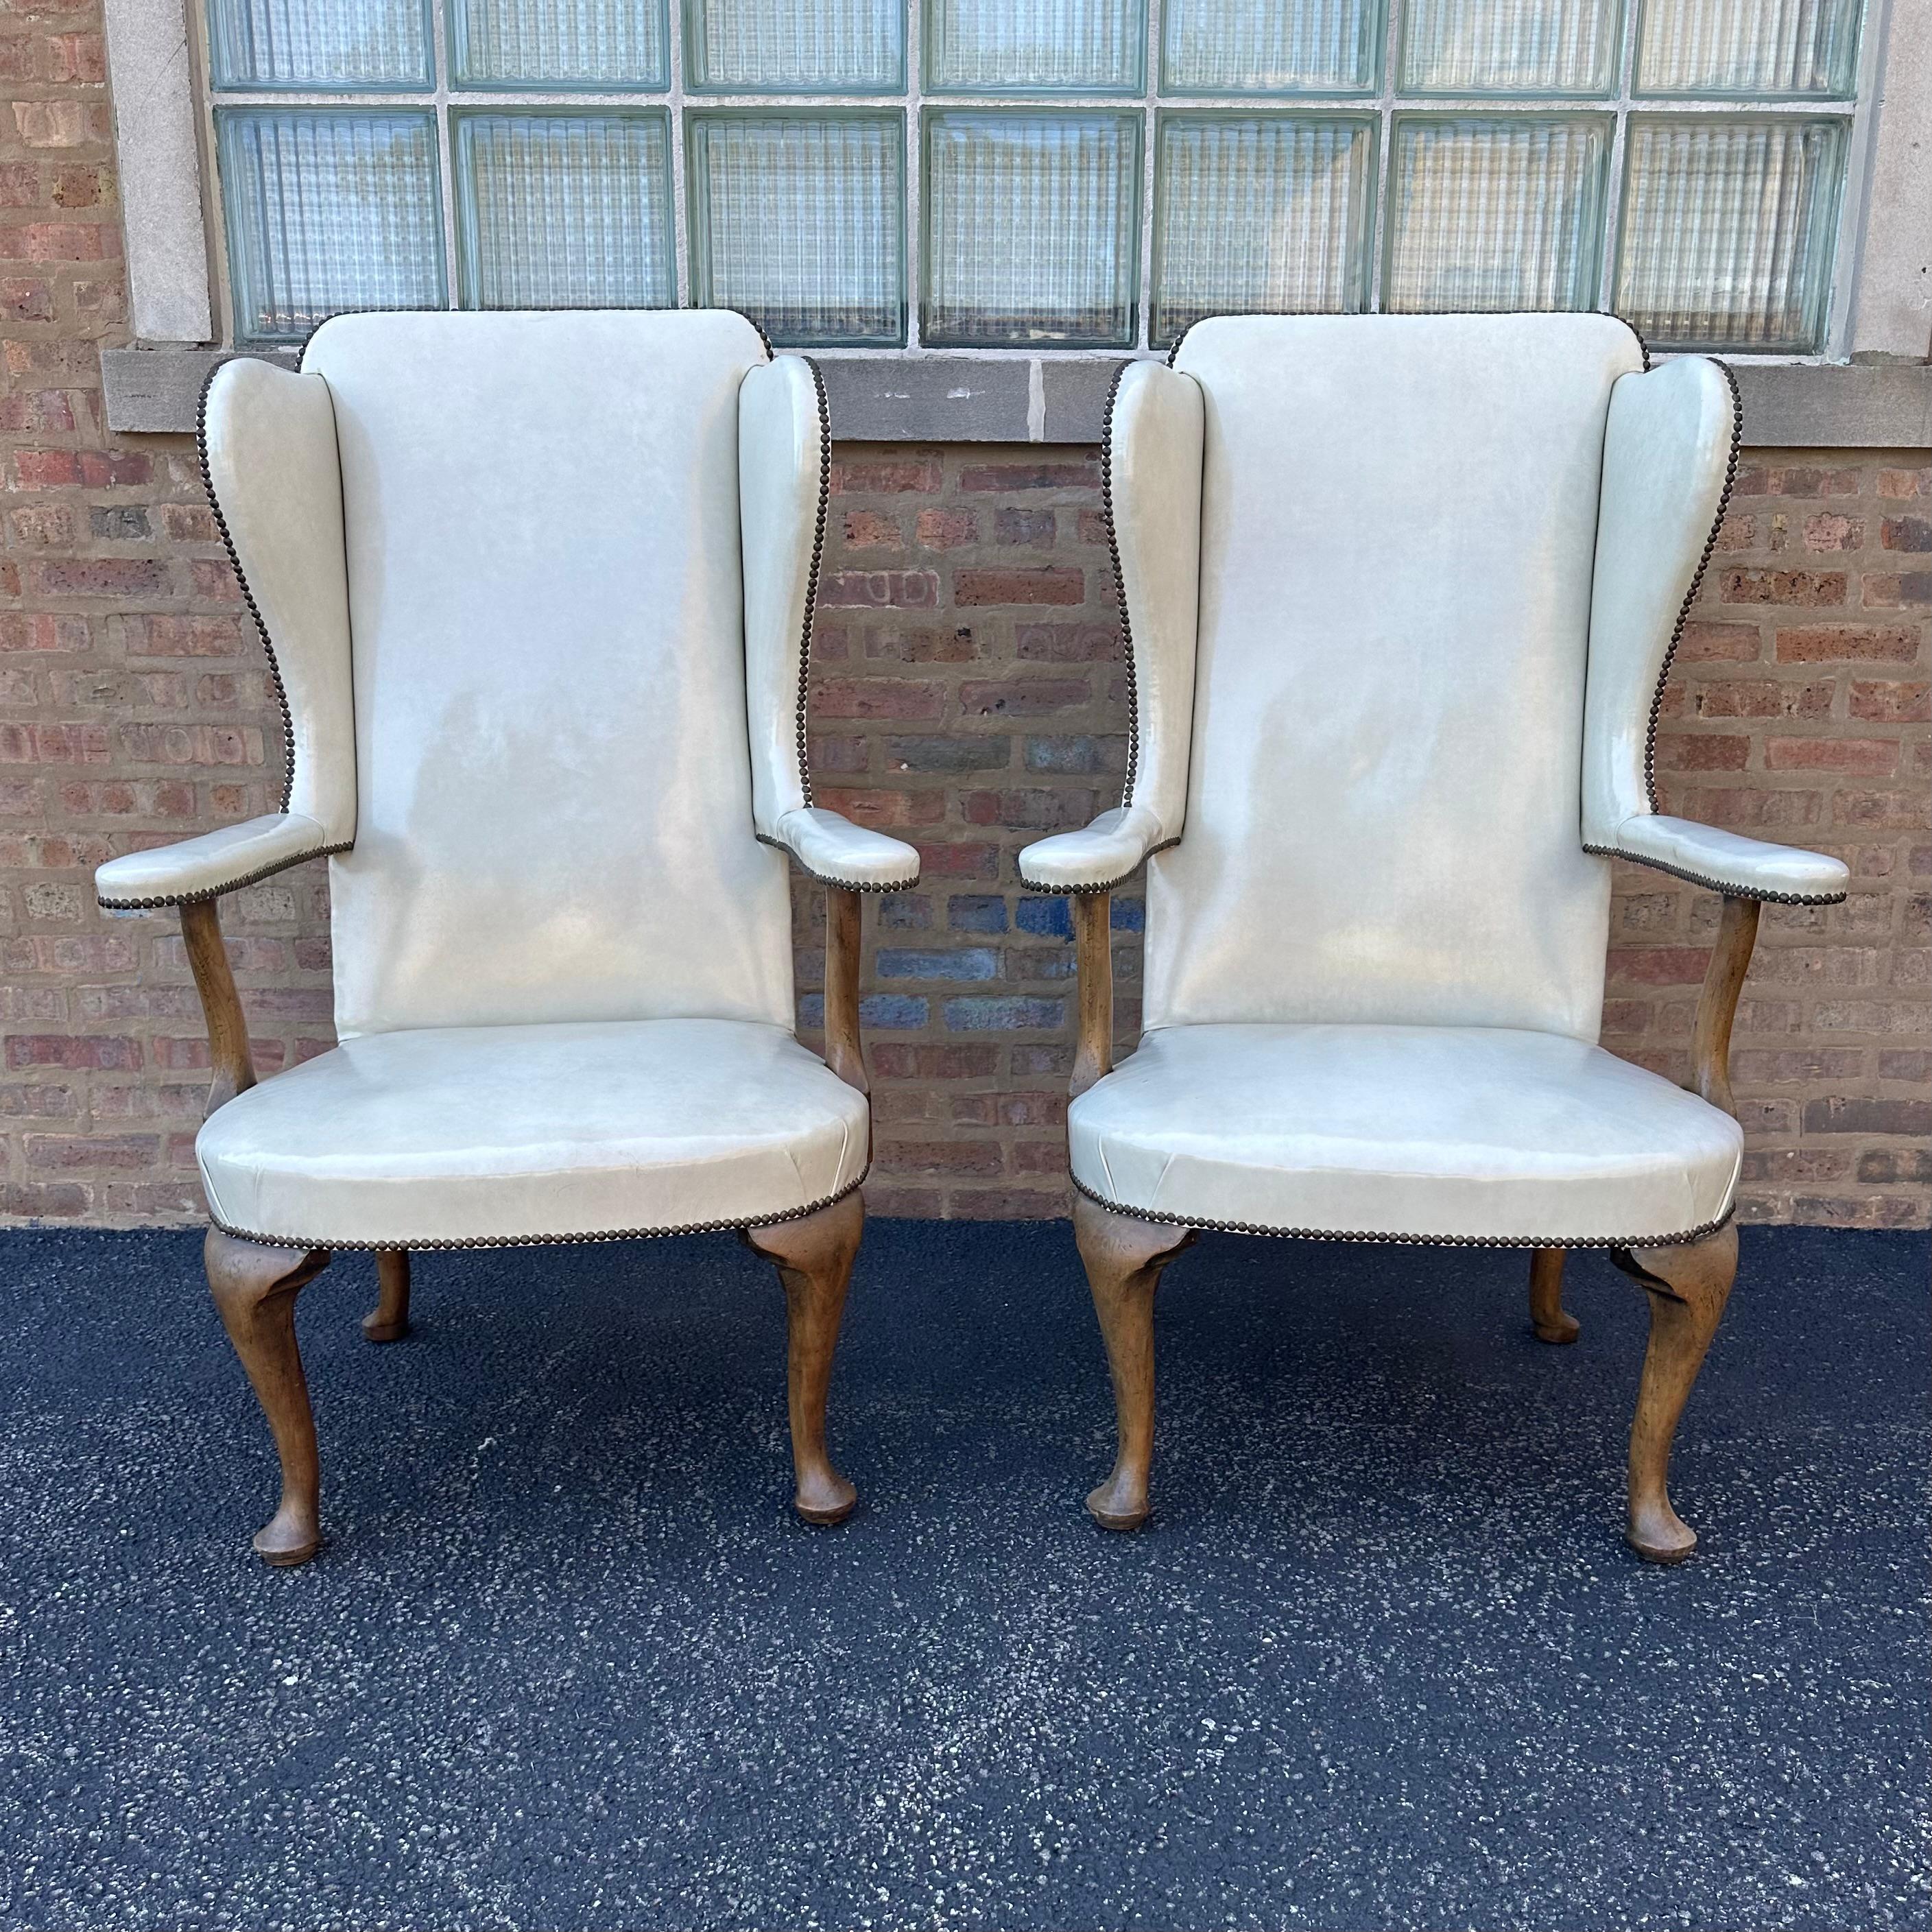 This fabulous pair of tall wingback chairs in the French Provincial style was designed by well-known interior designer, Richard Himmel, of Chicago, and produced in 1970. The high-back chairs are upholstered in the original glossy cream leather and